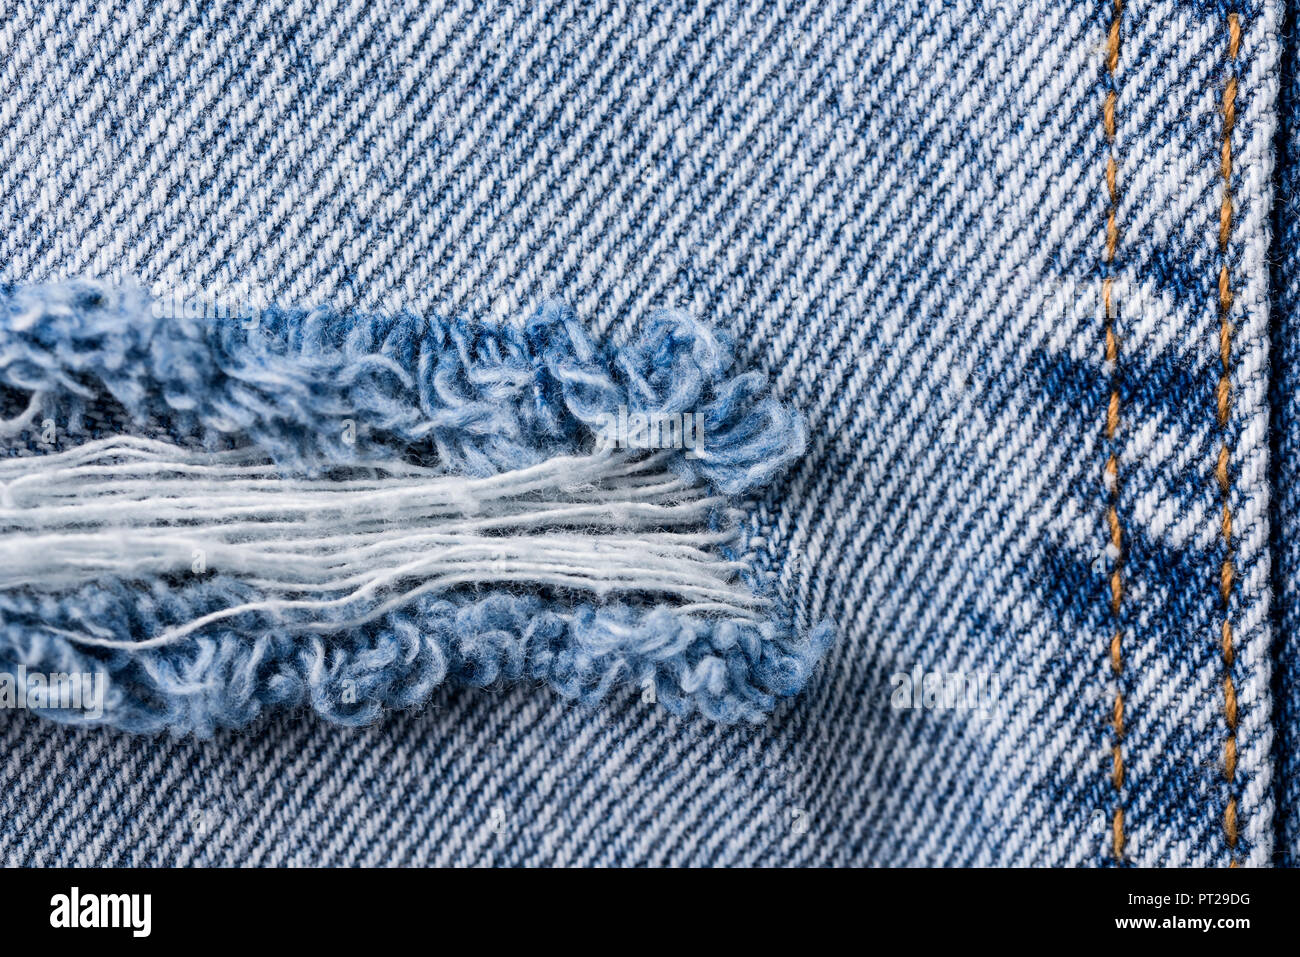 Denim Texture Of Torn Up Jeans Stock Photo - Alamy